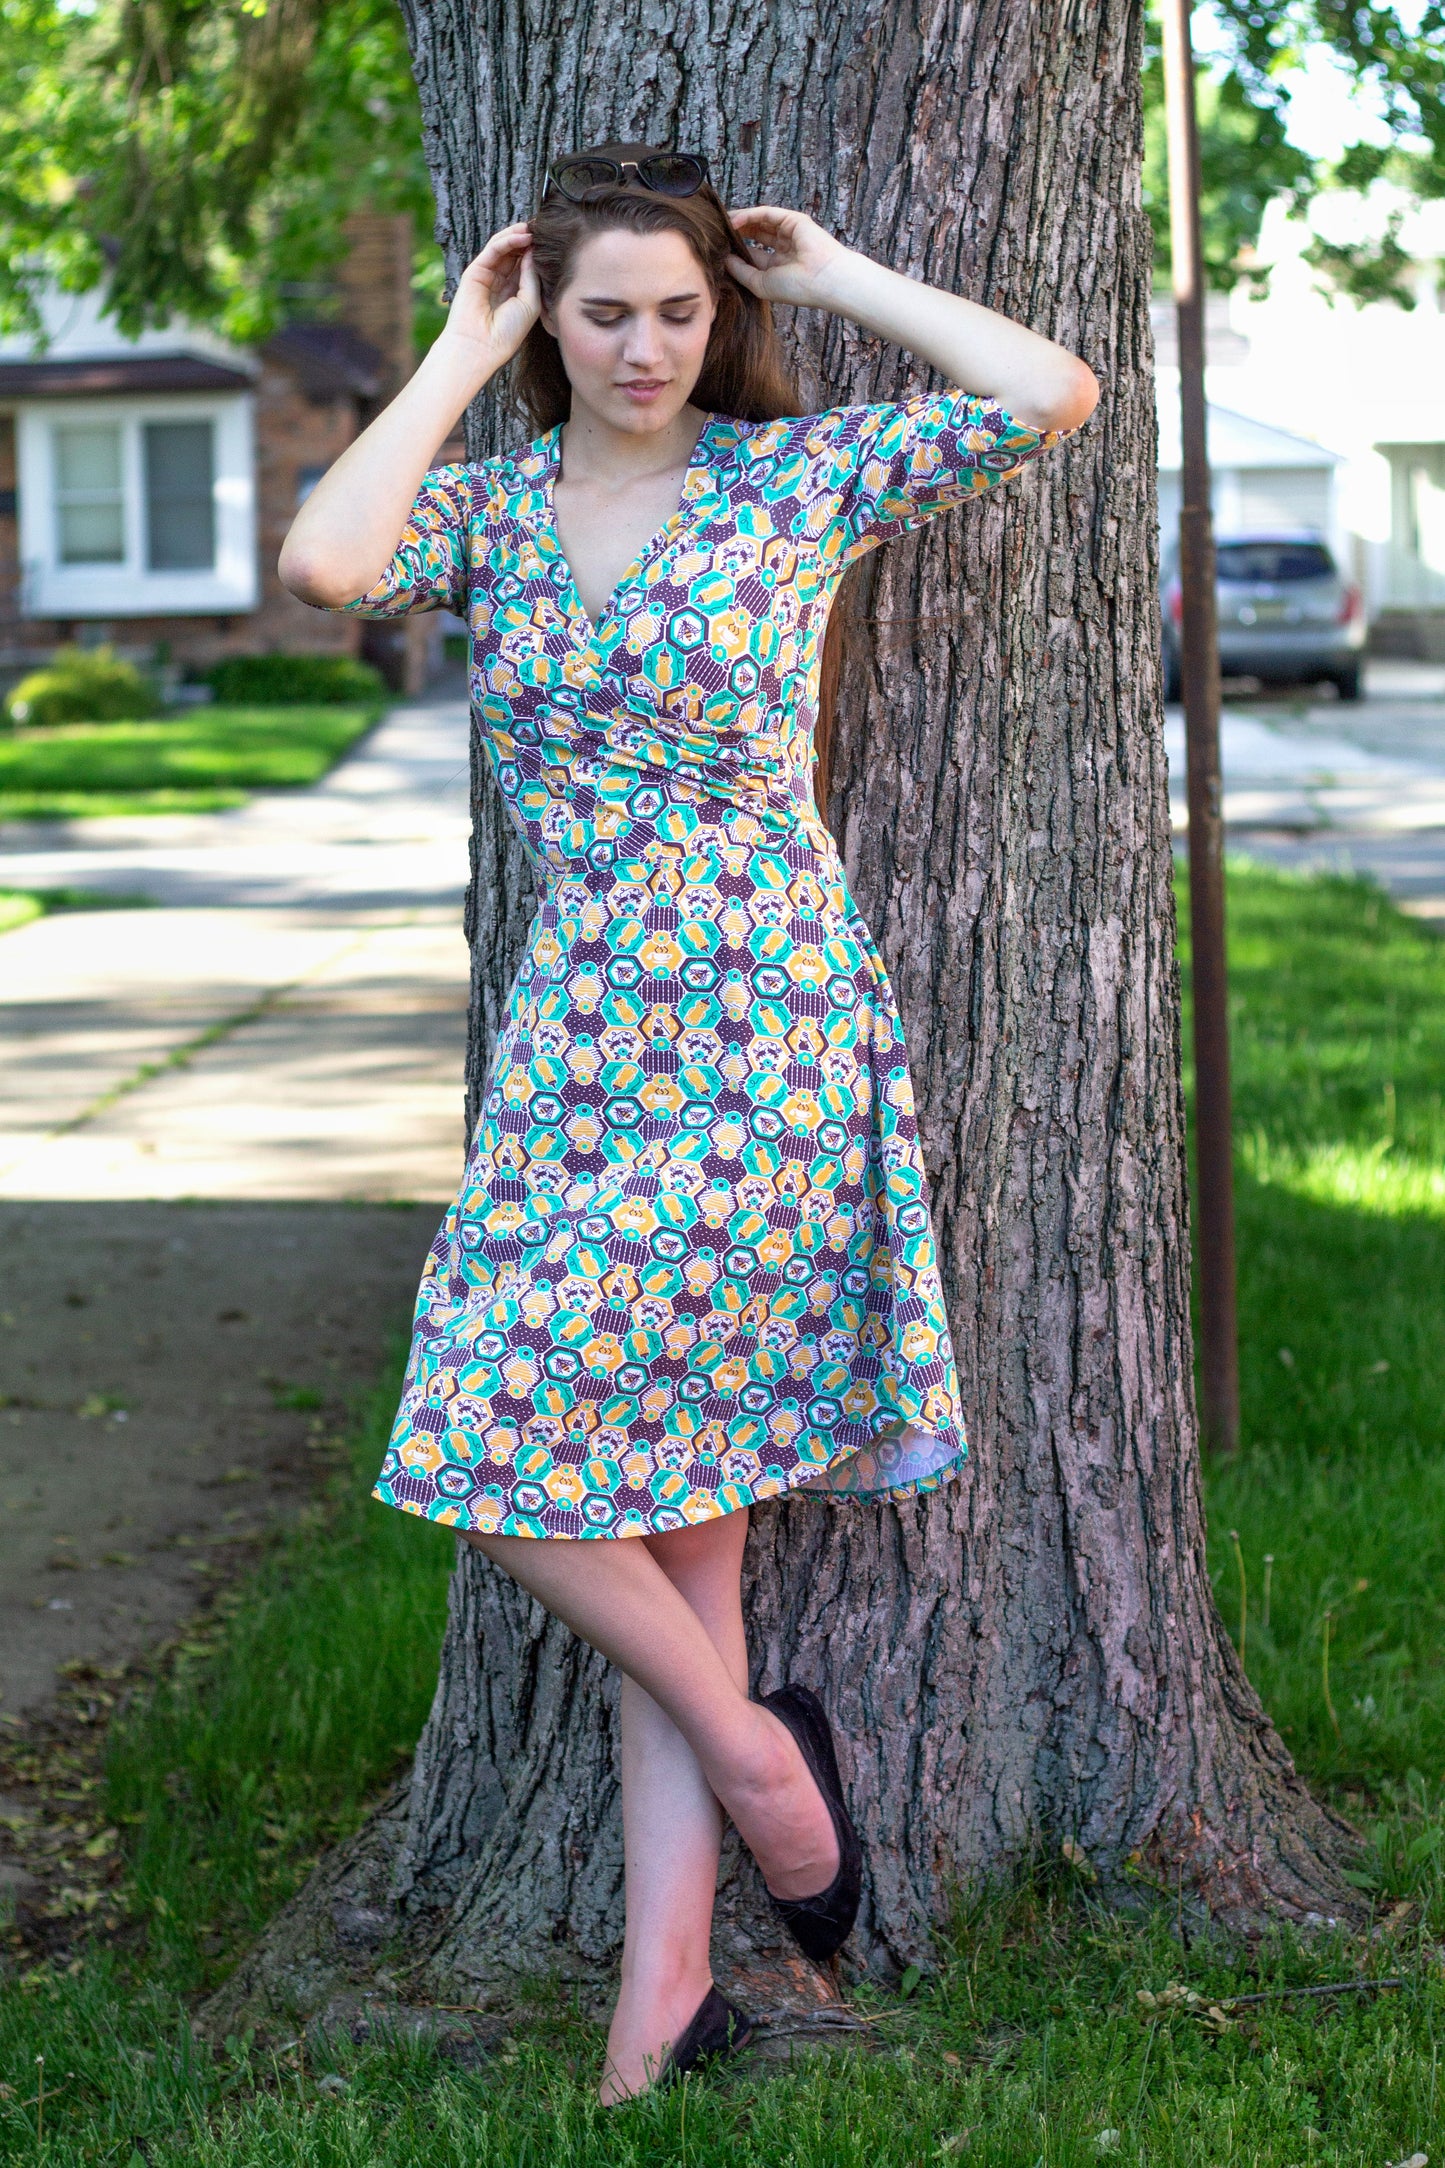 Brown-haired model wearing yellow, green and brown honeybee and hexagon print wrap dress in front of a tree